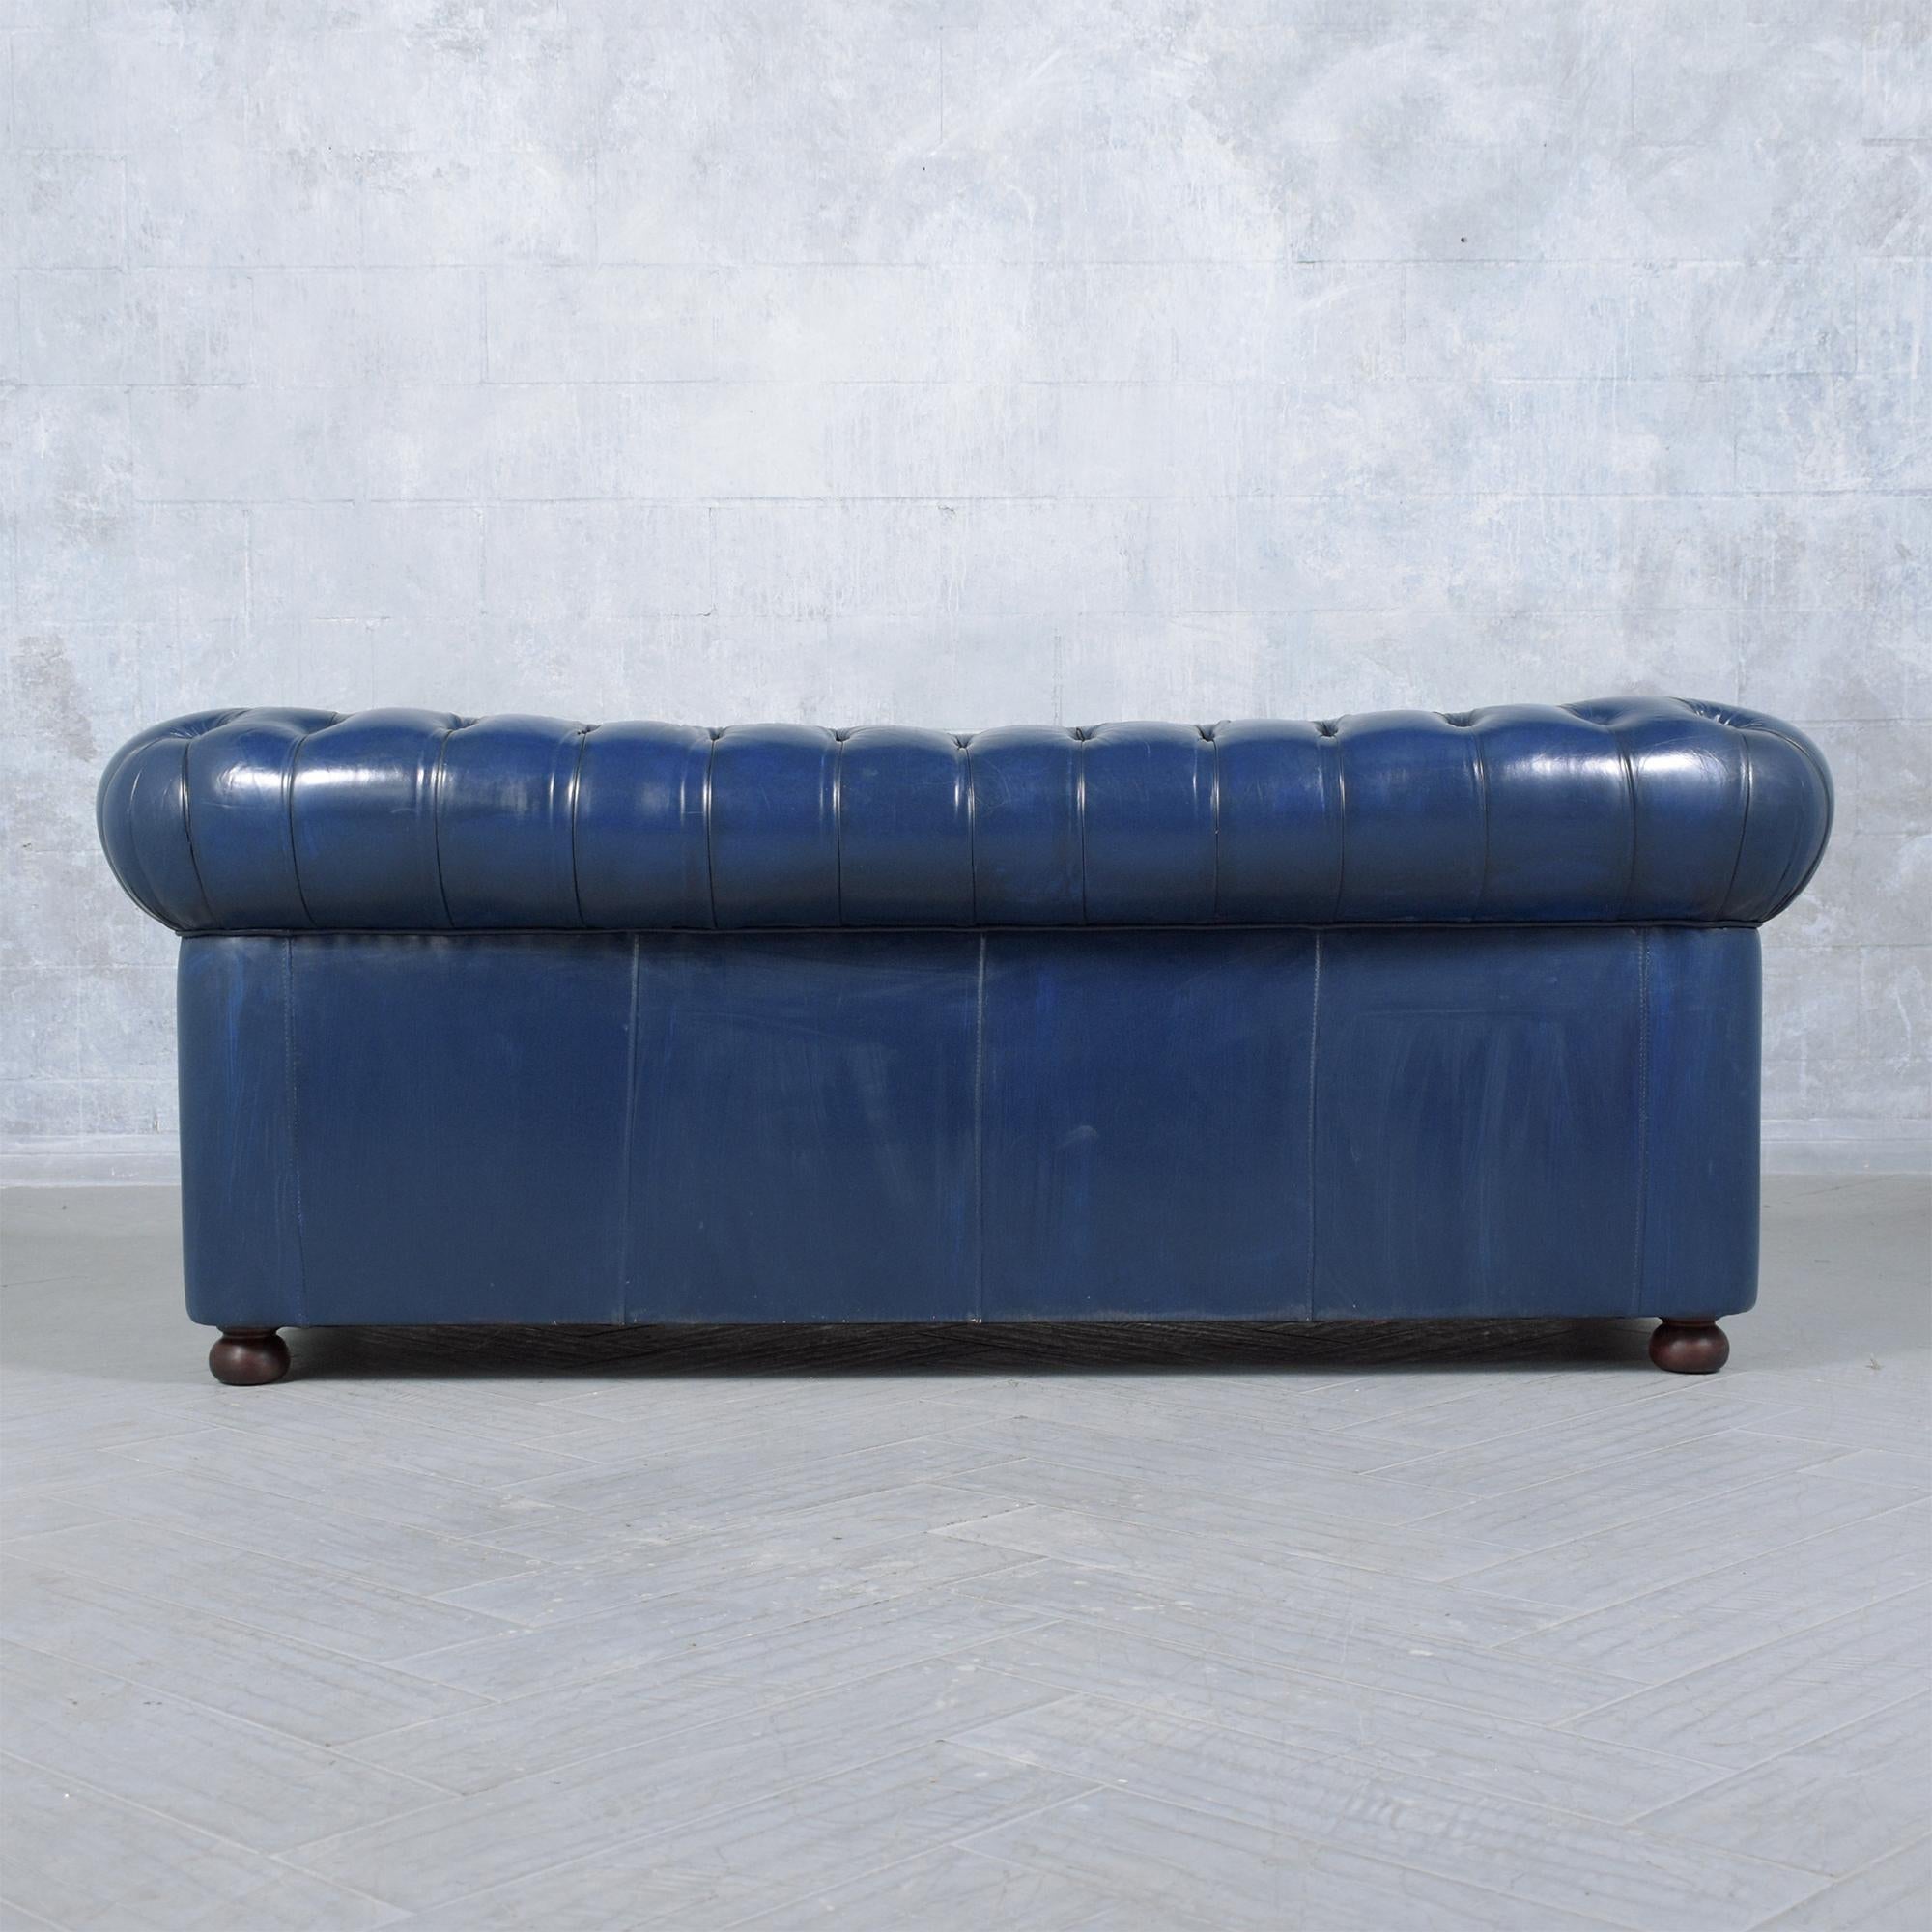 Restored Vintage Chesterfield Sofa in Distressed Navy Leather 3